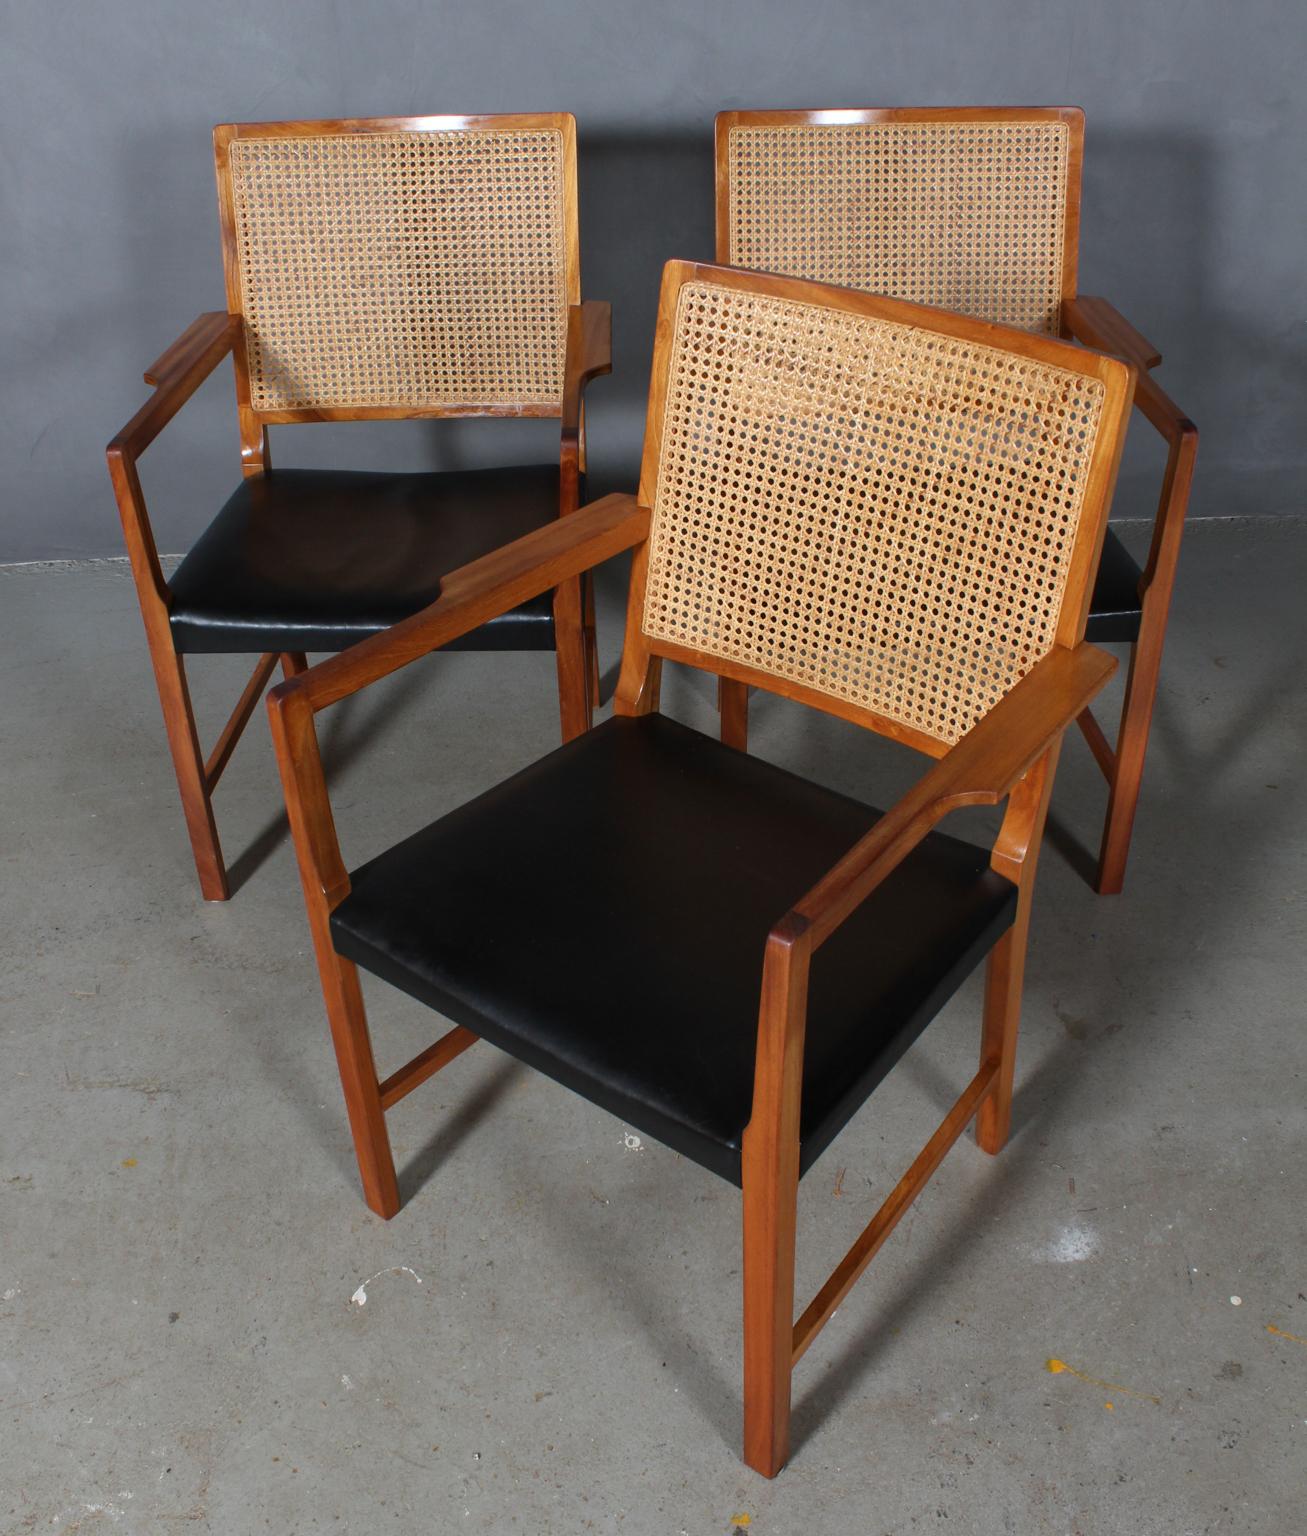 Bernt Pedersen set of armchairs with mahogany frame and cane back.

Original black leather upholstery.

Made by Wørtz Snedkeri.